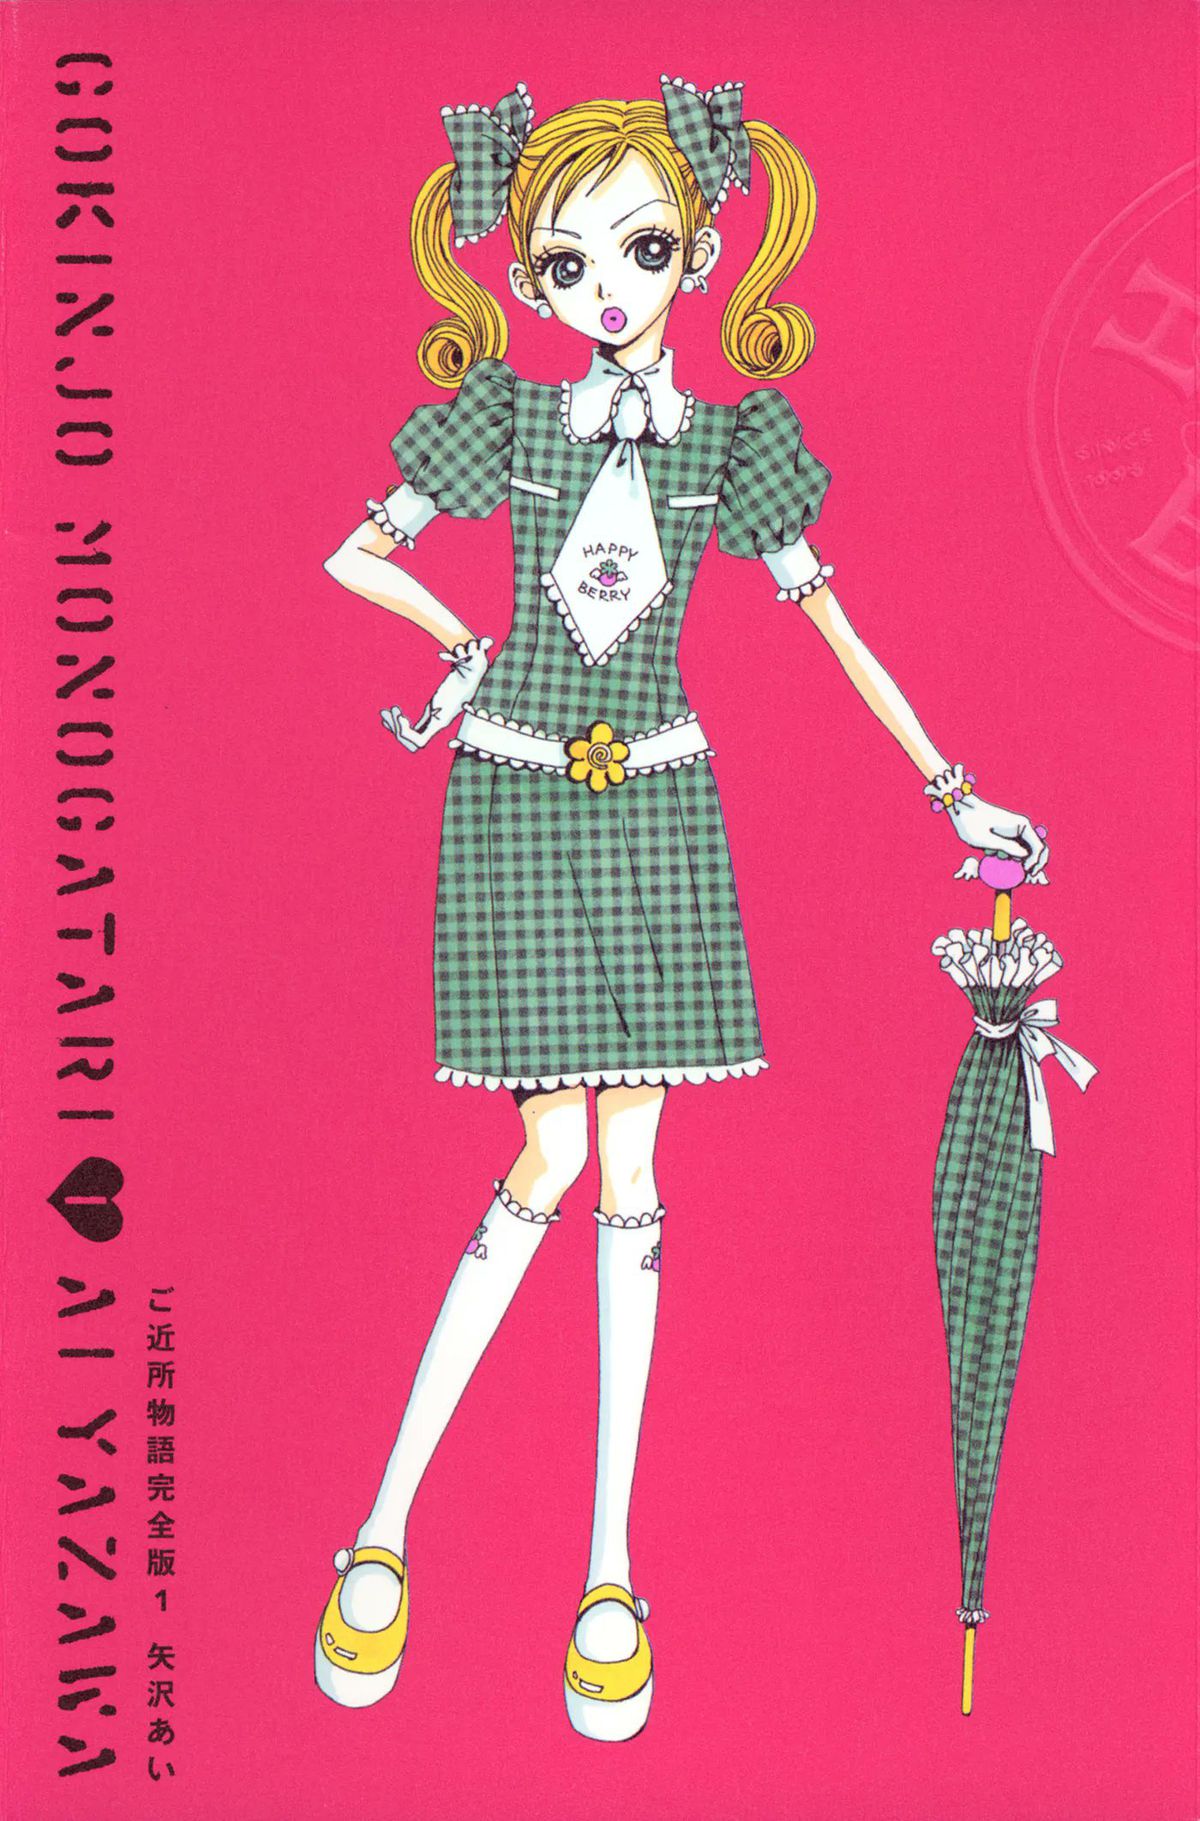 A pig-tailed girl in a fashionable dress, wide tie, and matching umbrella poses on the cover of Neighborhood Story.